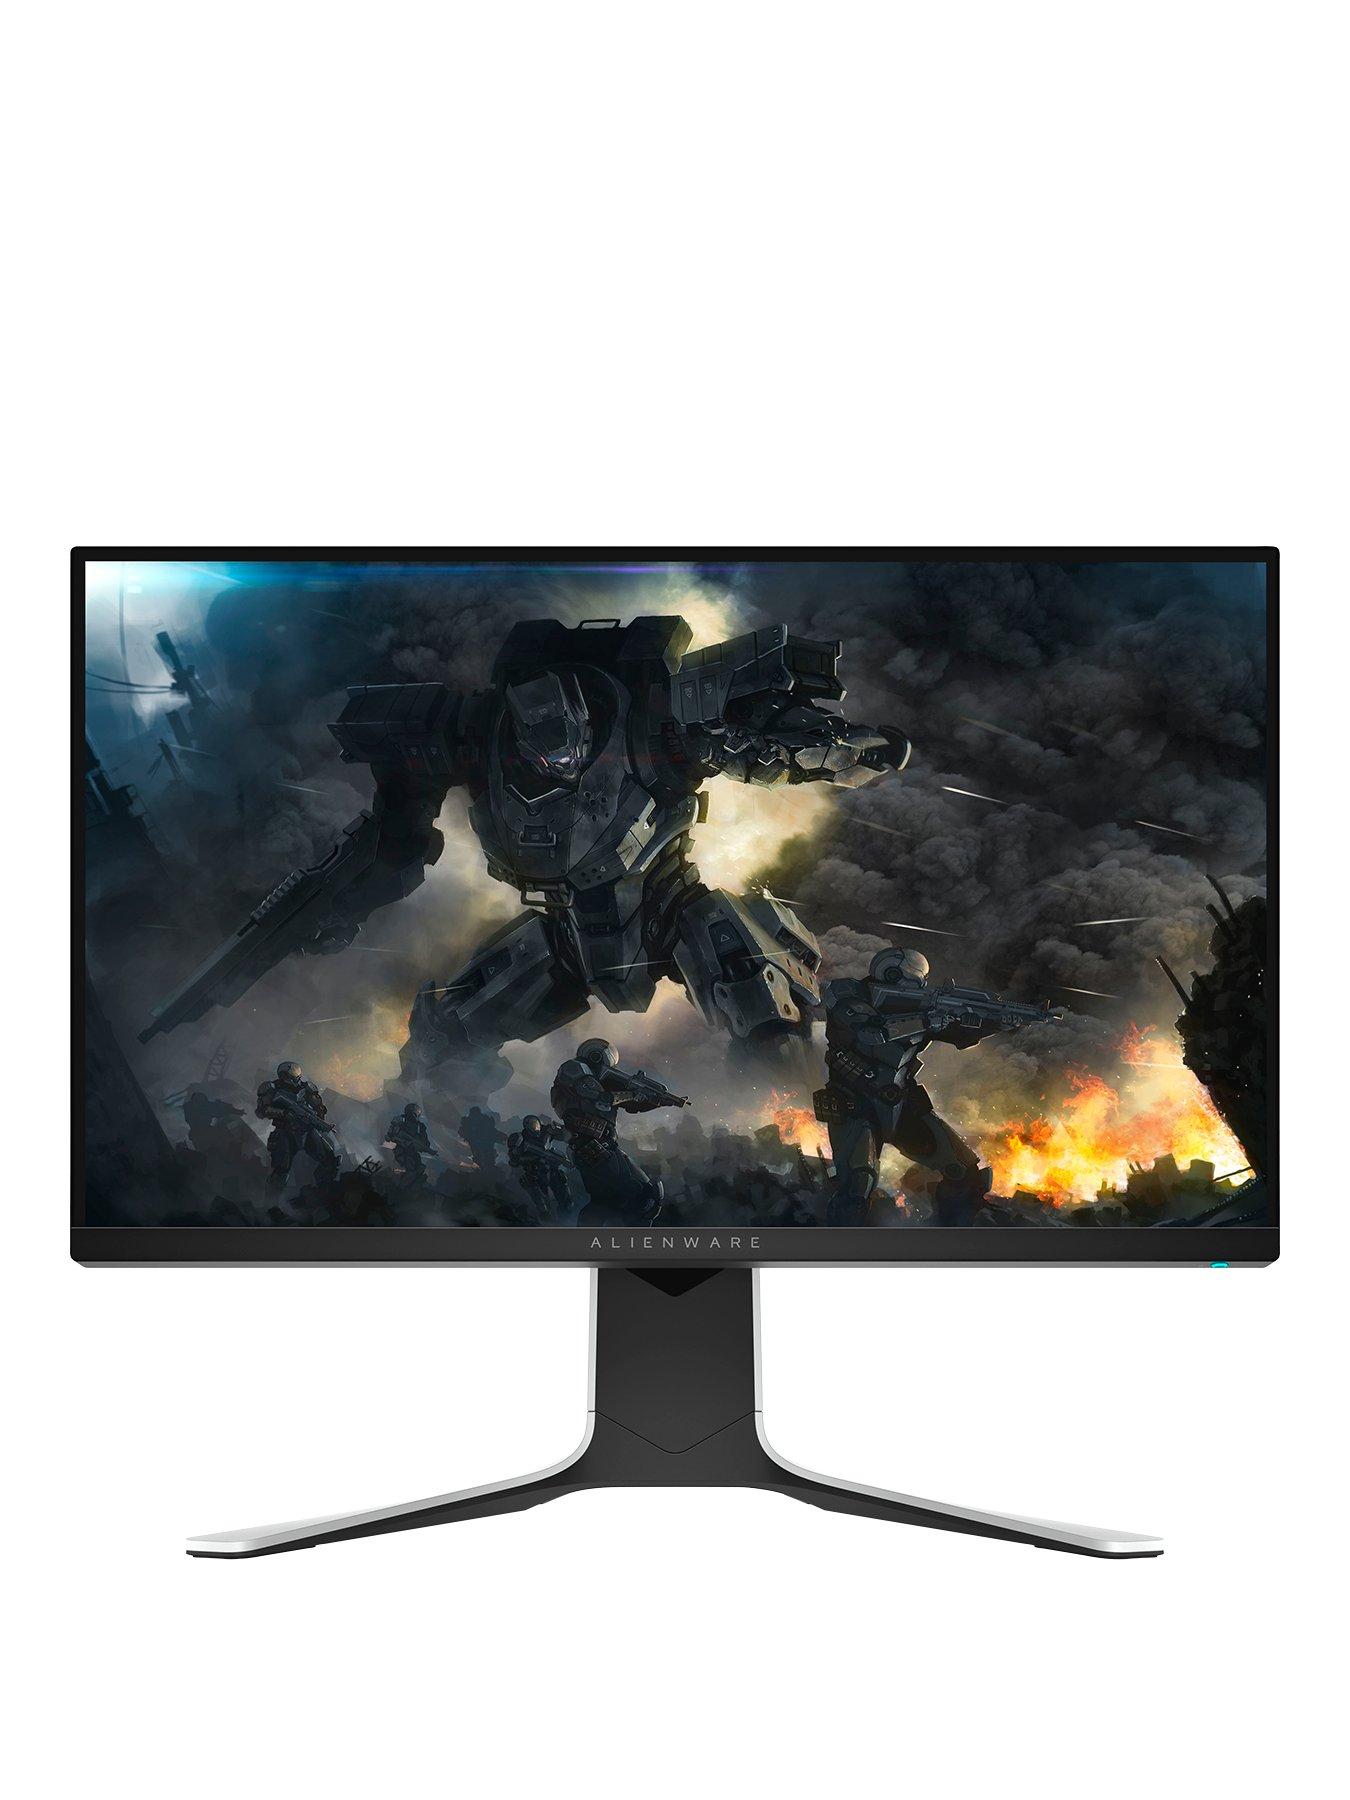 Alienware Aw27hf 27 Inch Full Hd Gaming Monitor Fast Ips 1ms 240hz 99 Srgb Amd Freesync Nvidia G Sync Compatible Alienfx Lighting 3 Year Warranty Very Co Uk